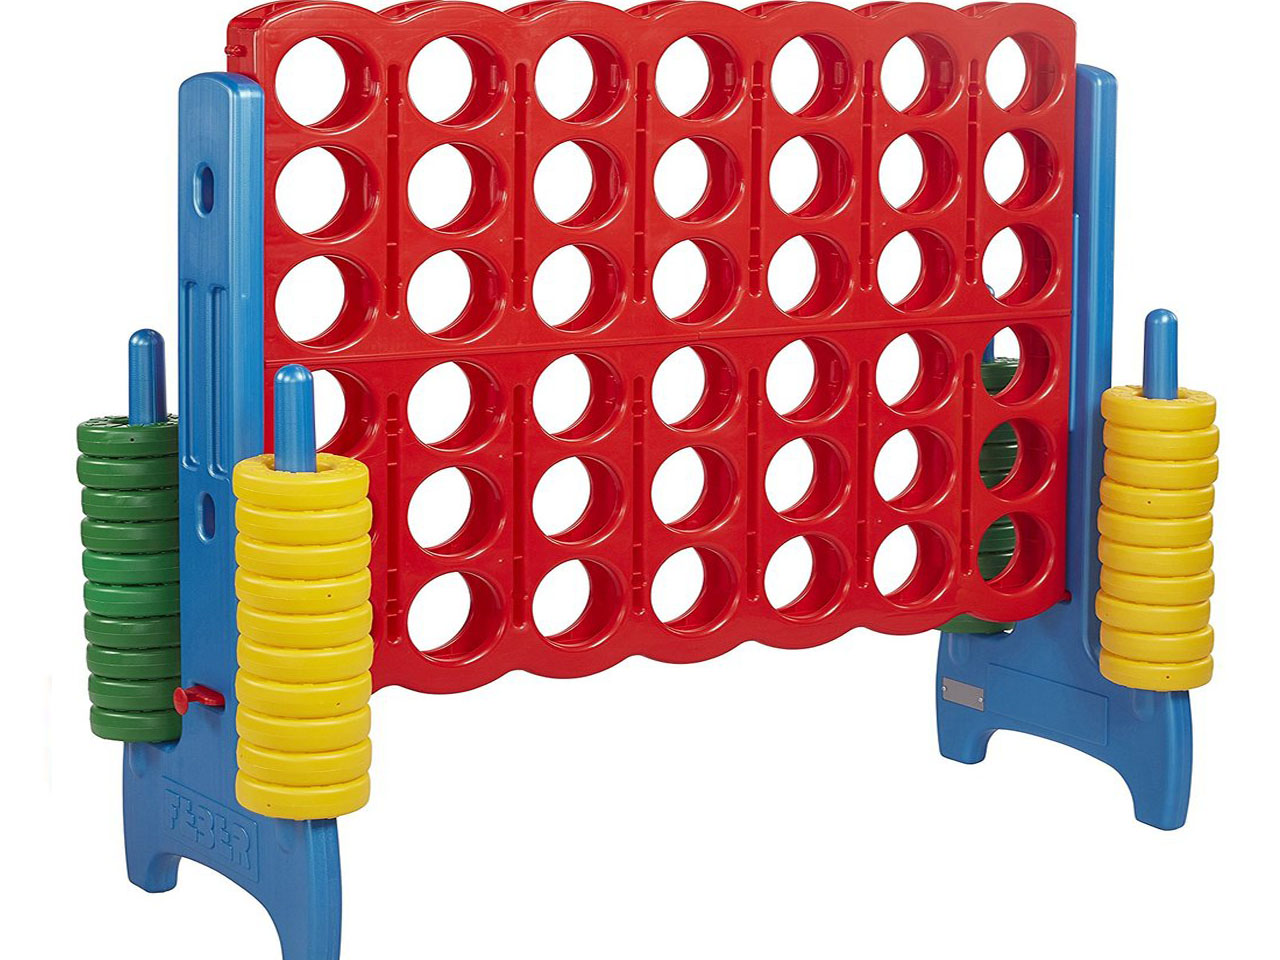 connect4 image 1